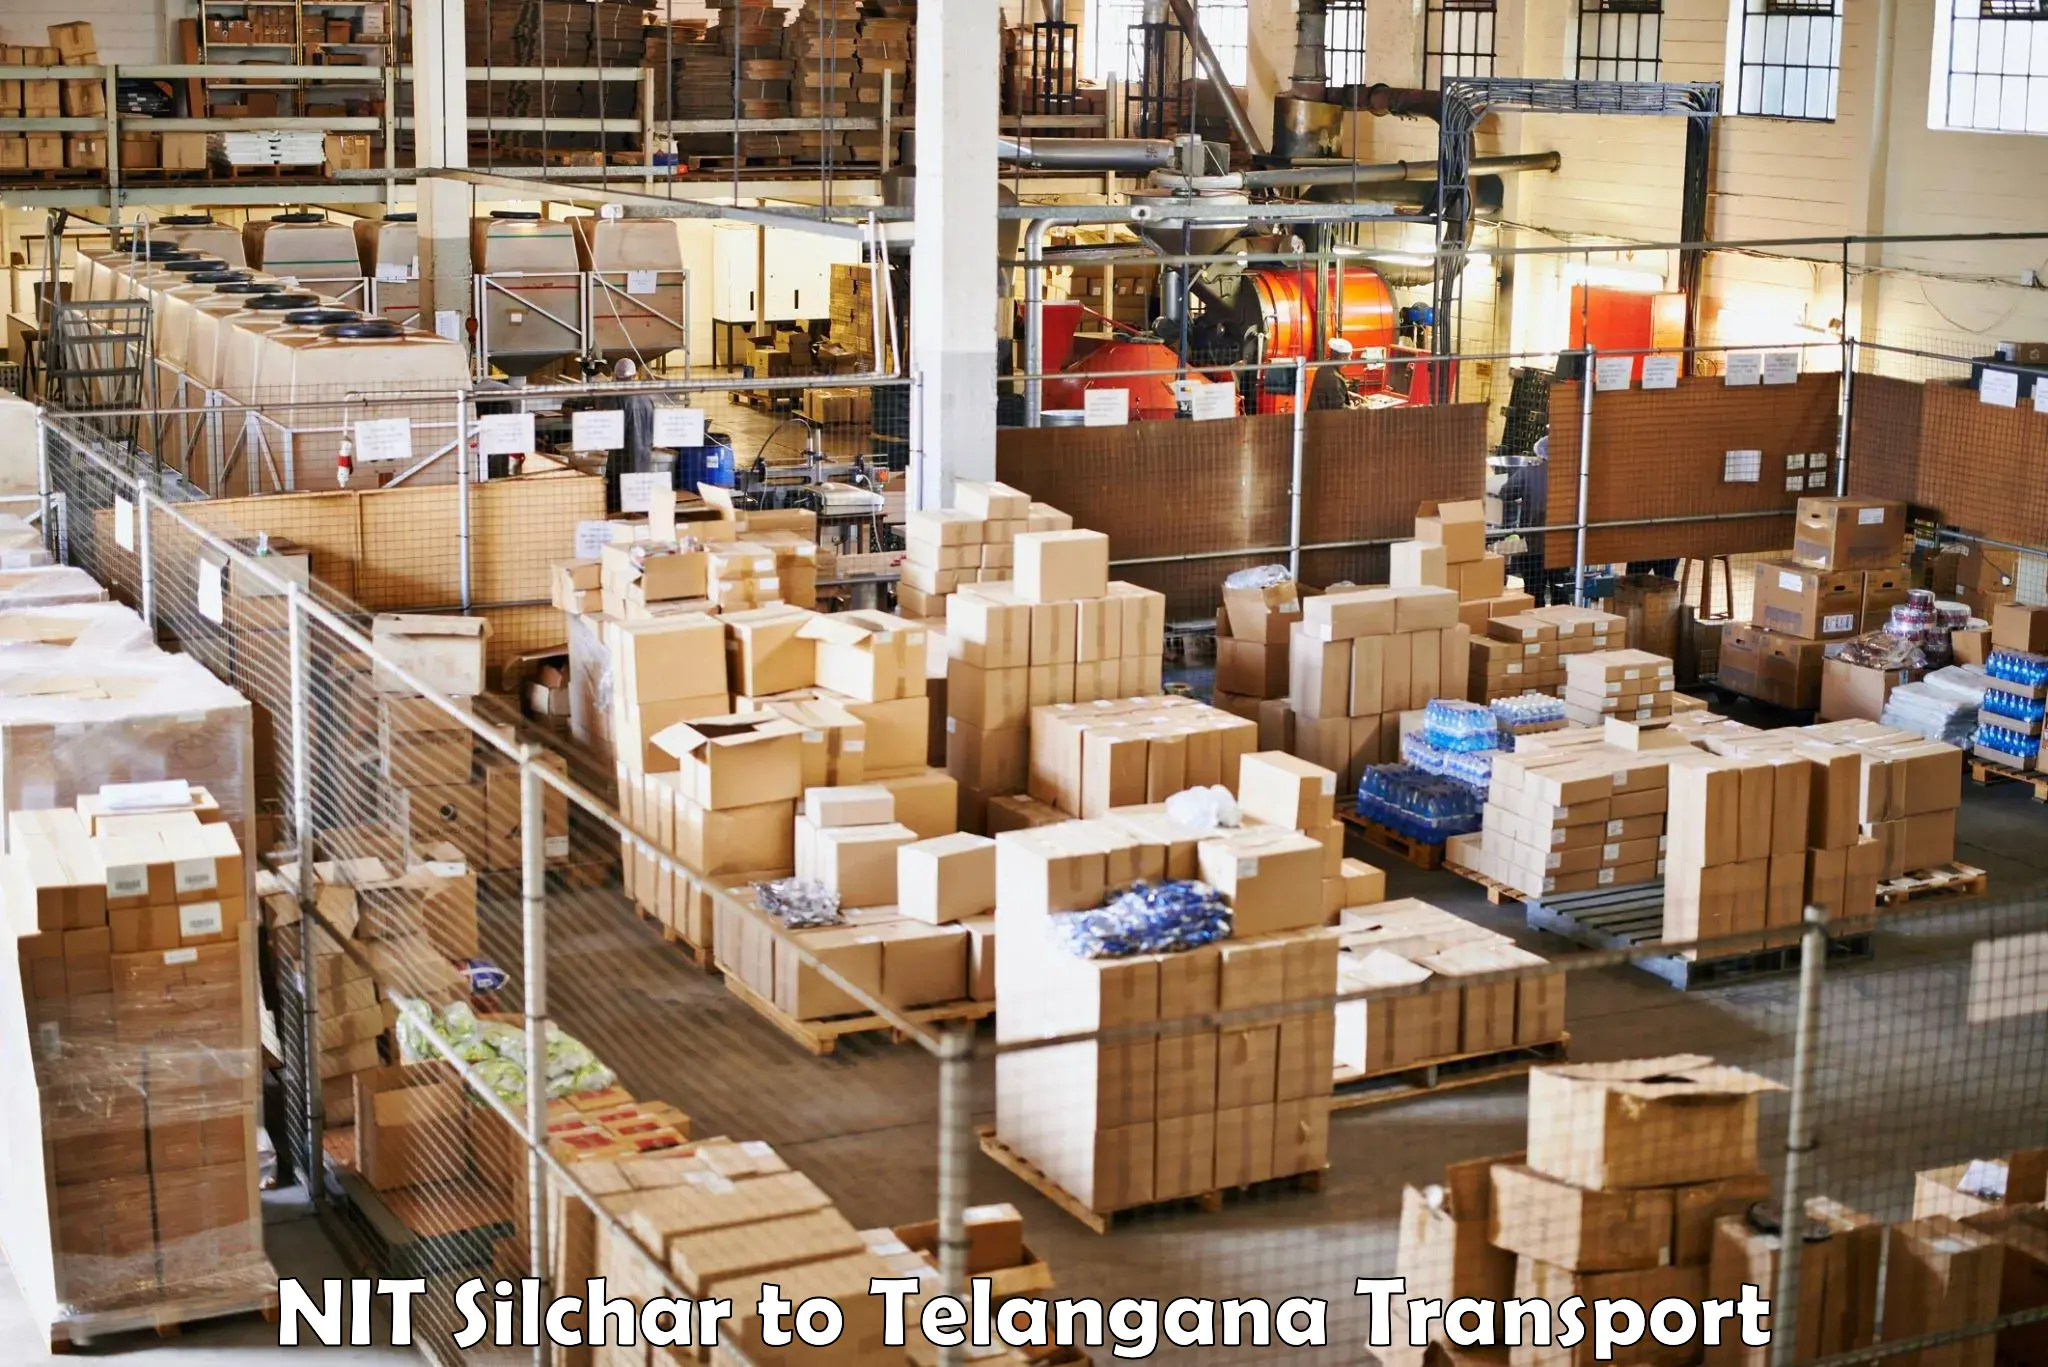 Vehicle transport services NIT Silchar to IIT Hyderabad